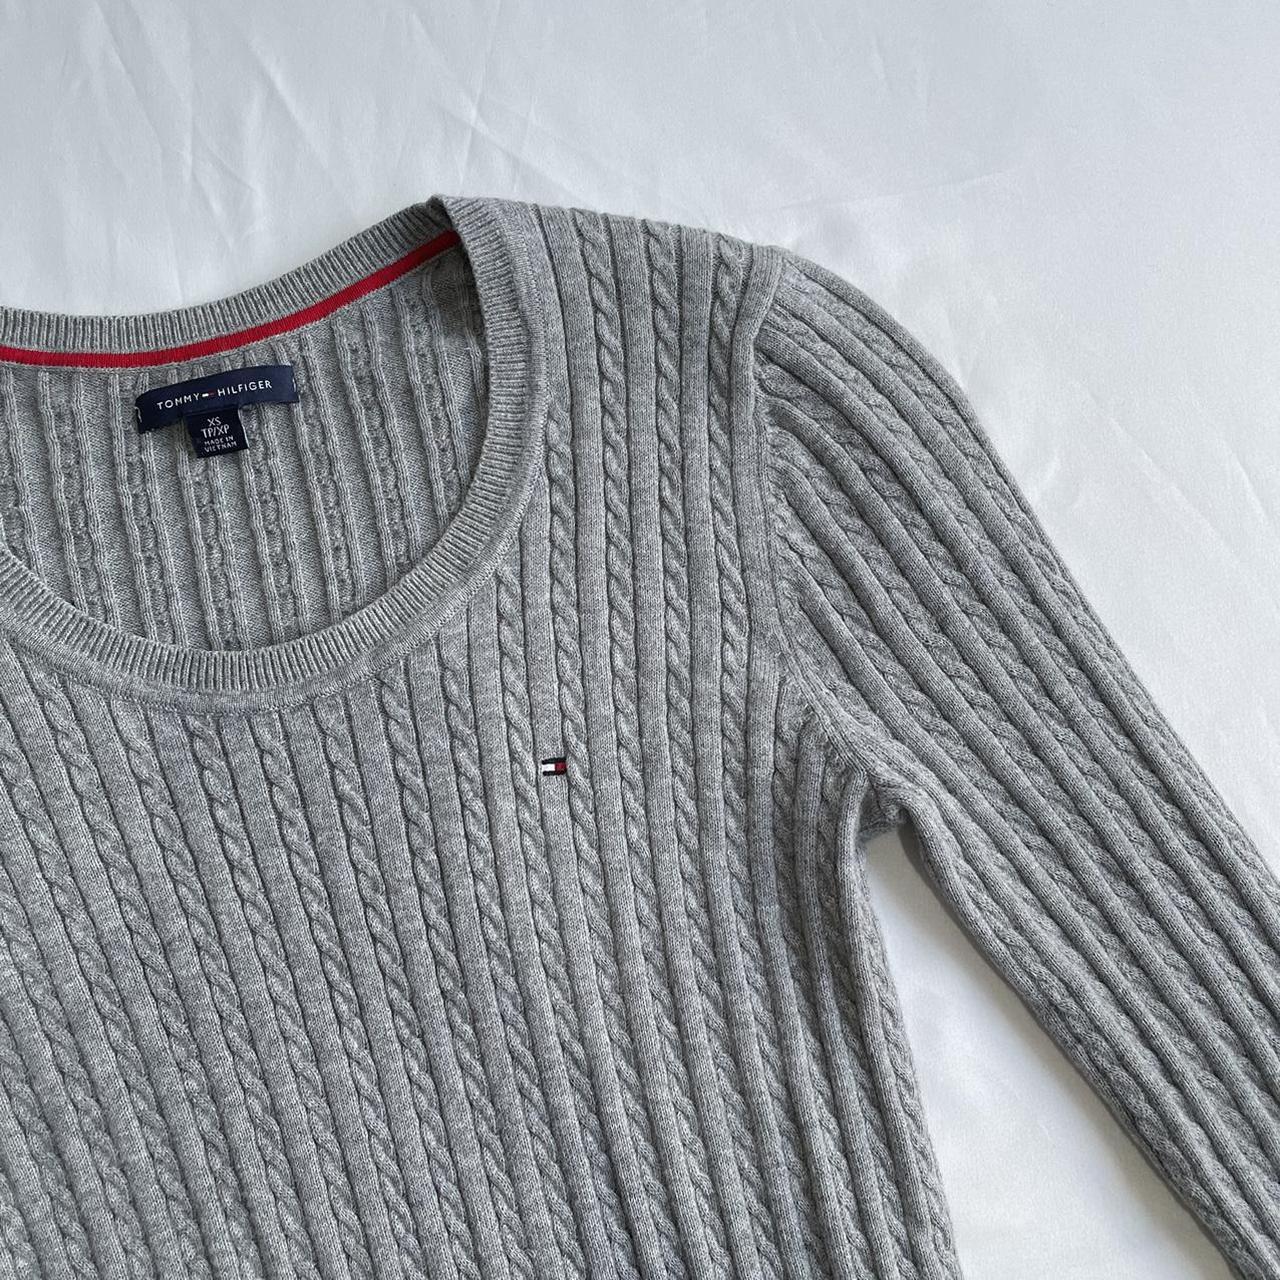 Tommy Hilfiger Classic Cable Knit Sweater in Grey... - Depop